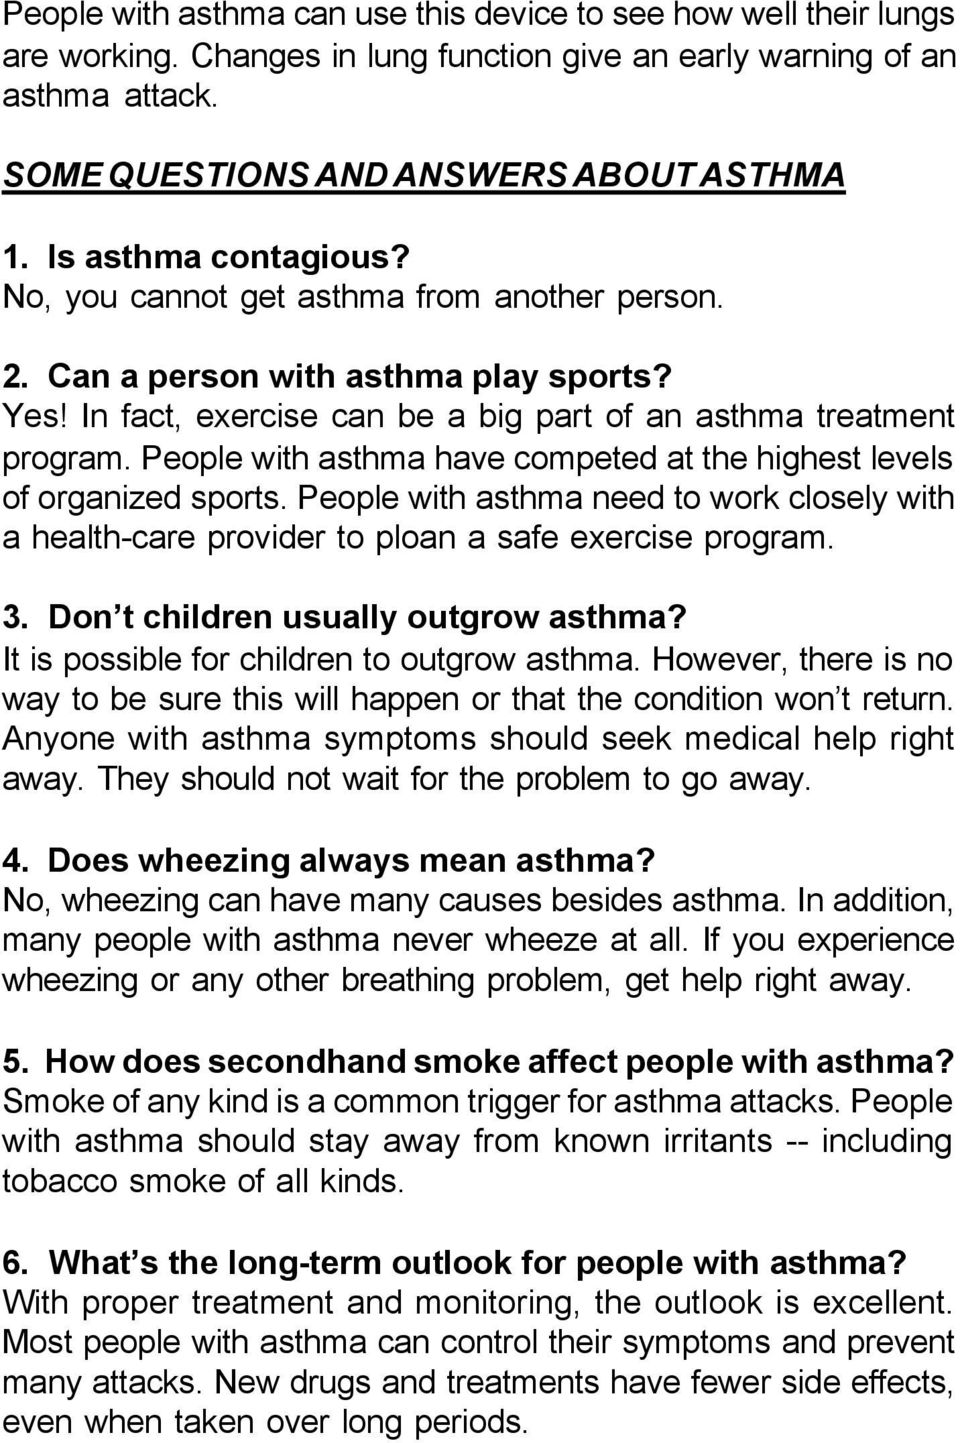 People with asthma have competed at the highest levels of organized sports. People with asthma need to work closely with a health-care provider to ploan a safe exercise program. 3.